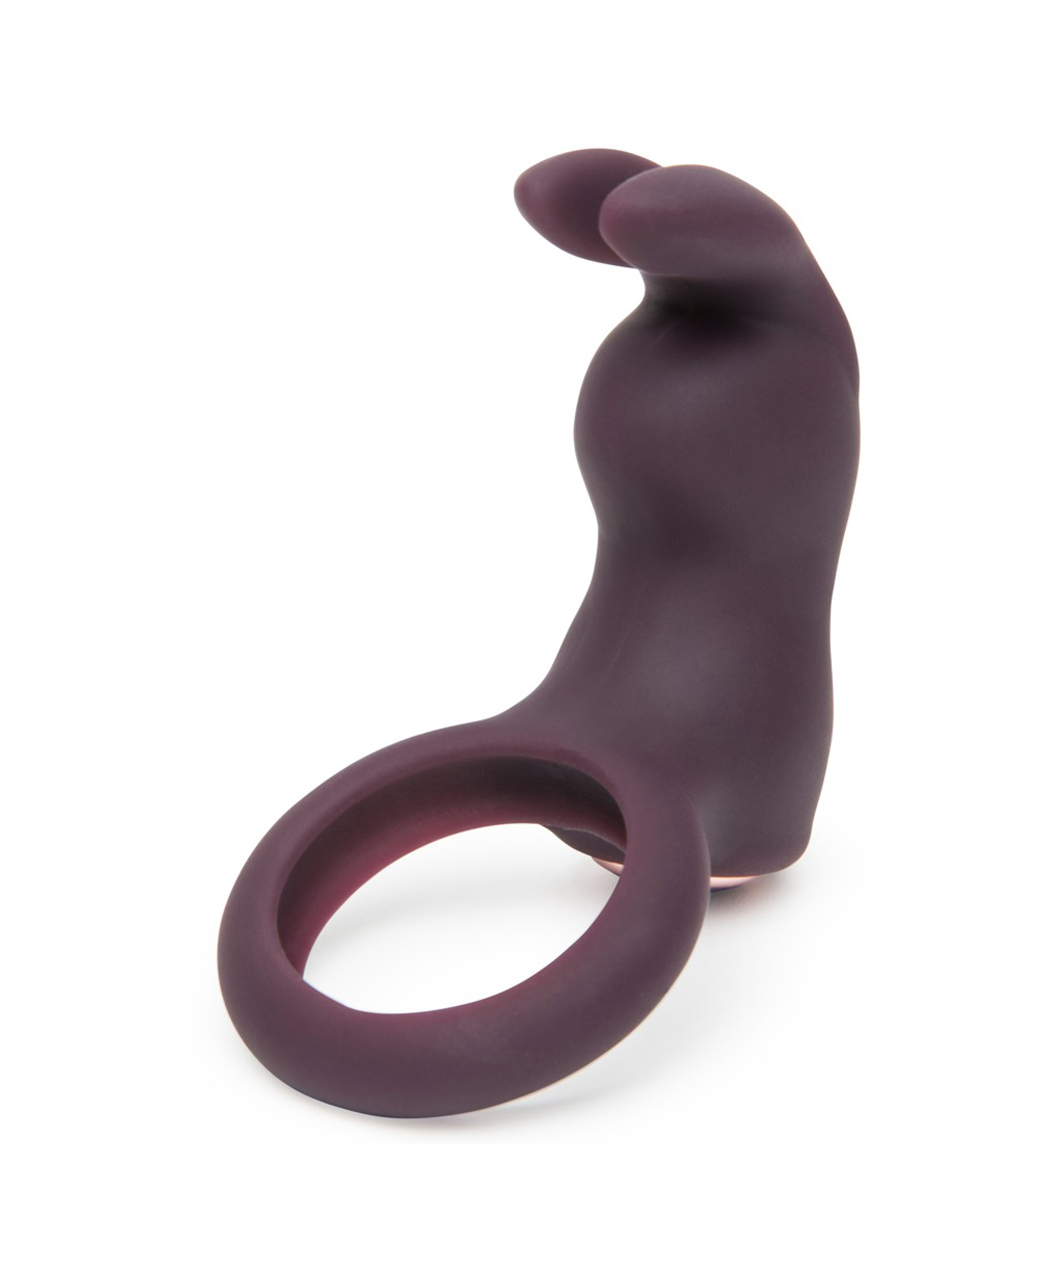 Fifty Shades of Grey Freed Lost In Each Other Vibrating Rabbit Love Ring